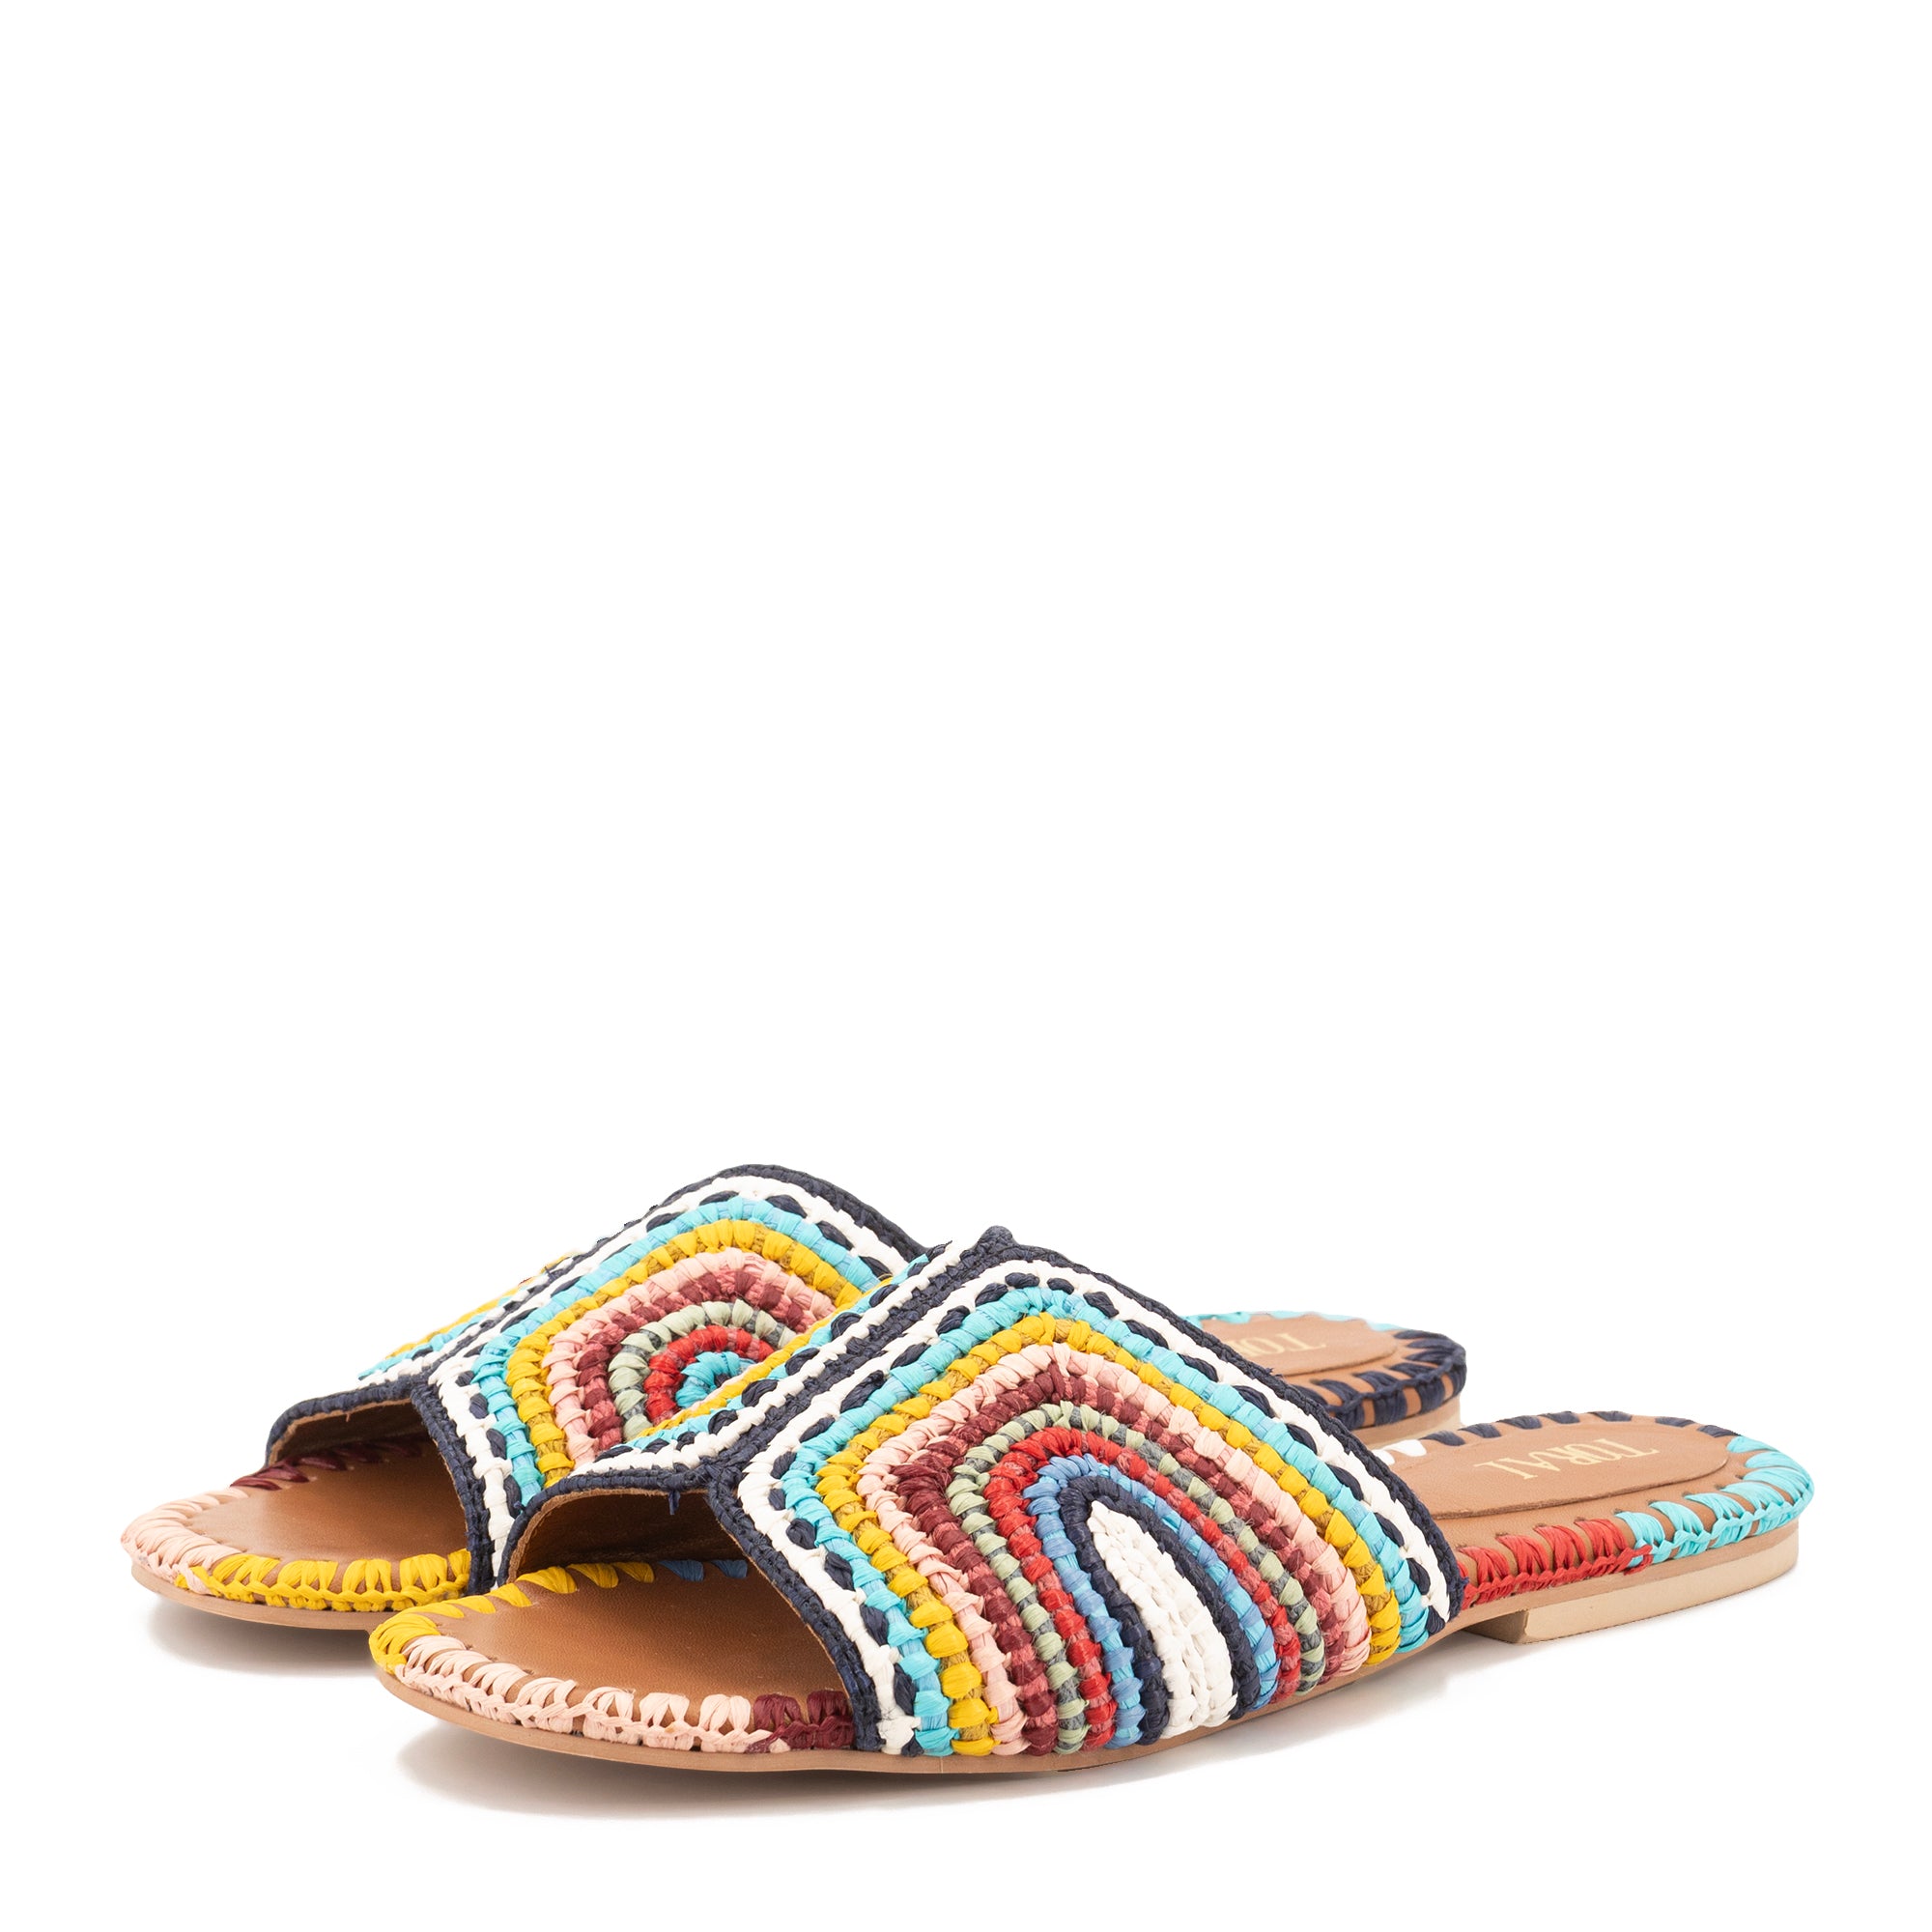 BETTY MULICOLORED SANDALS